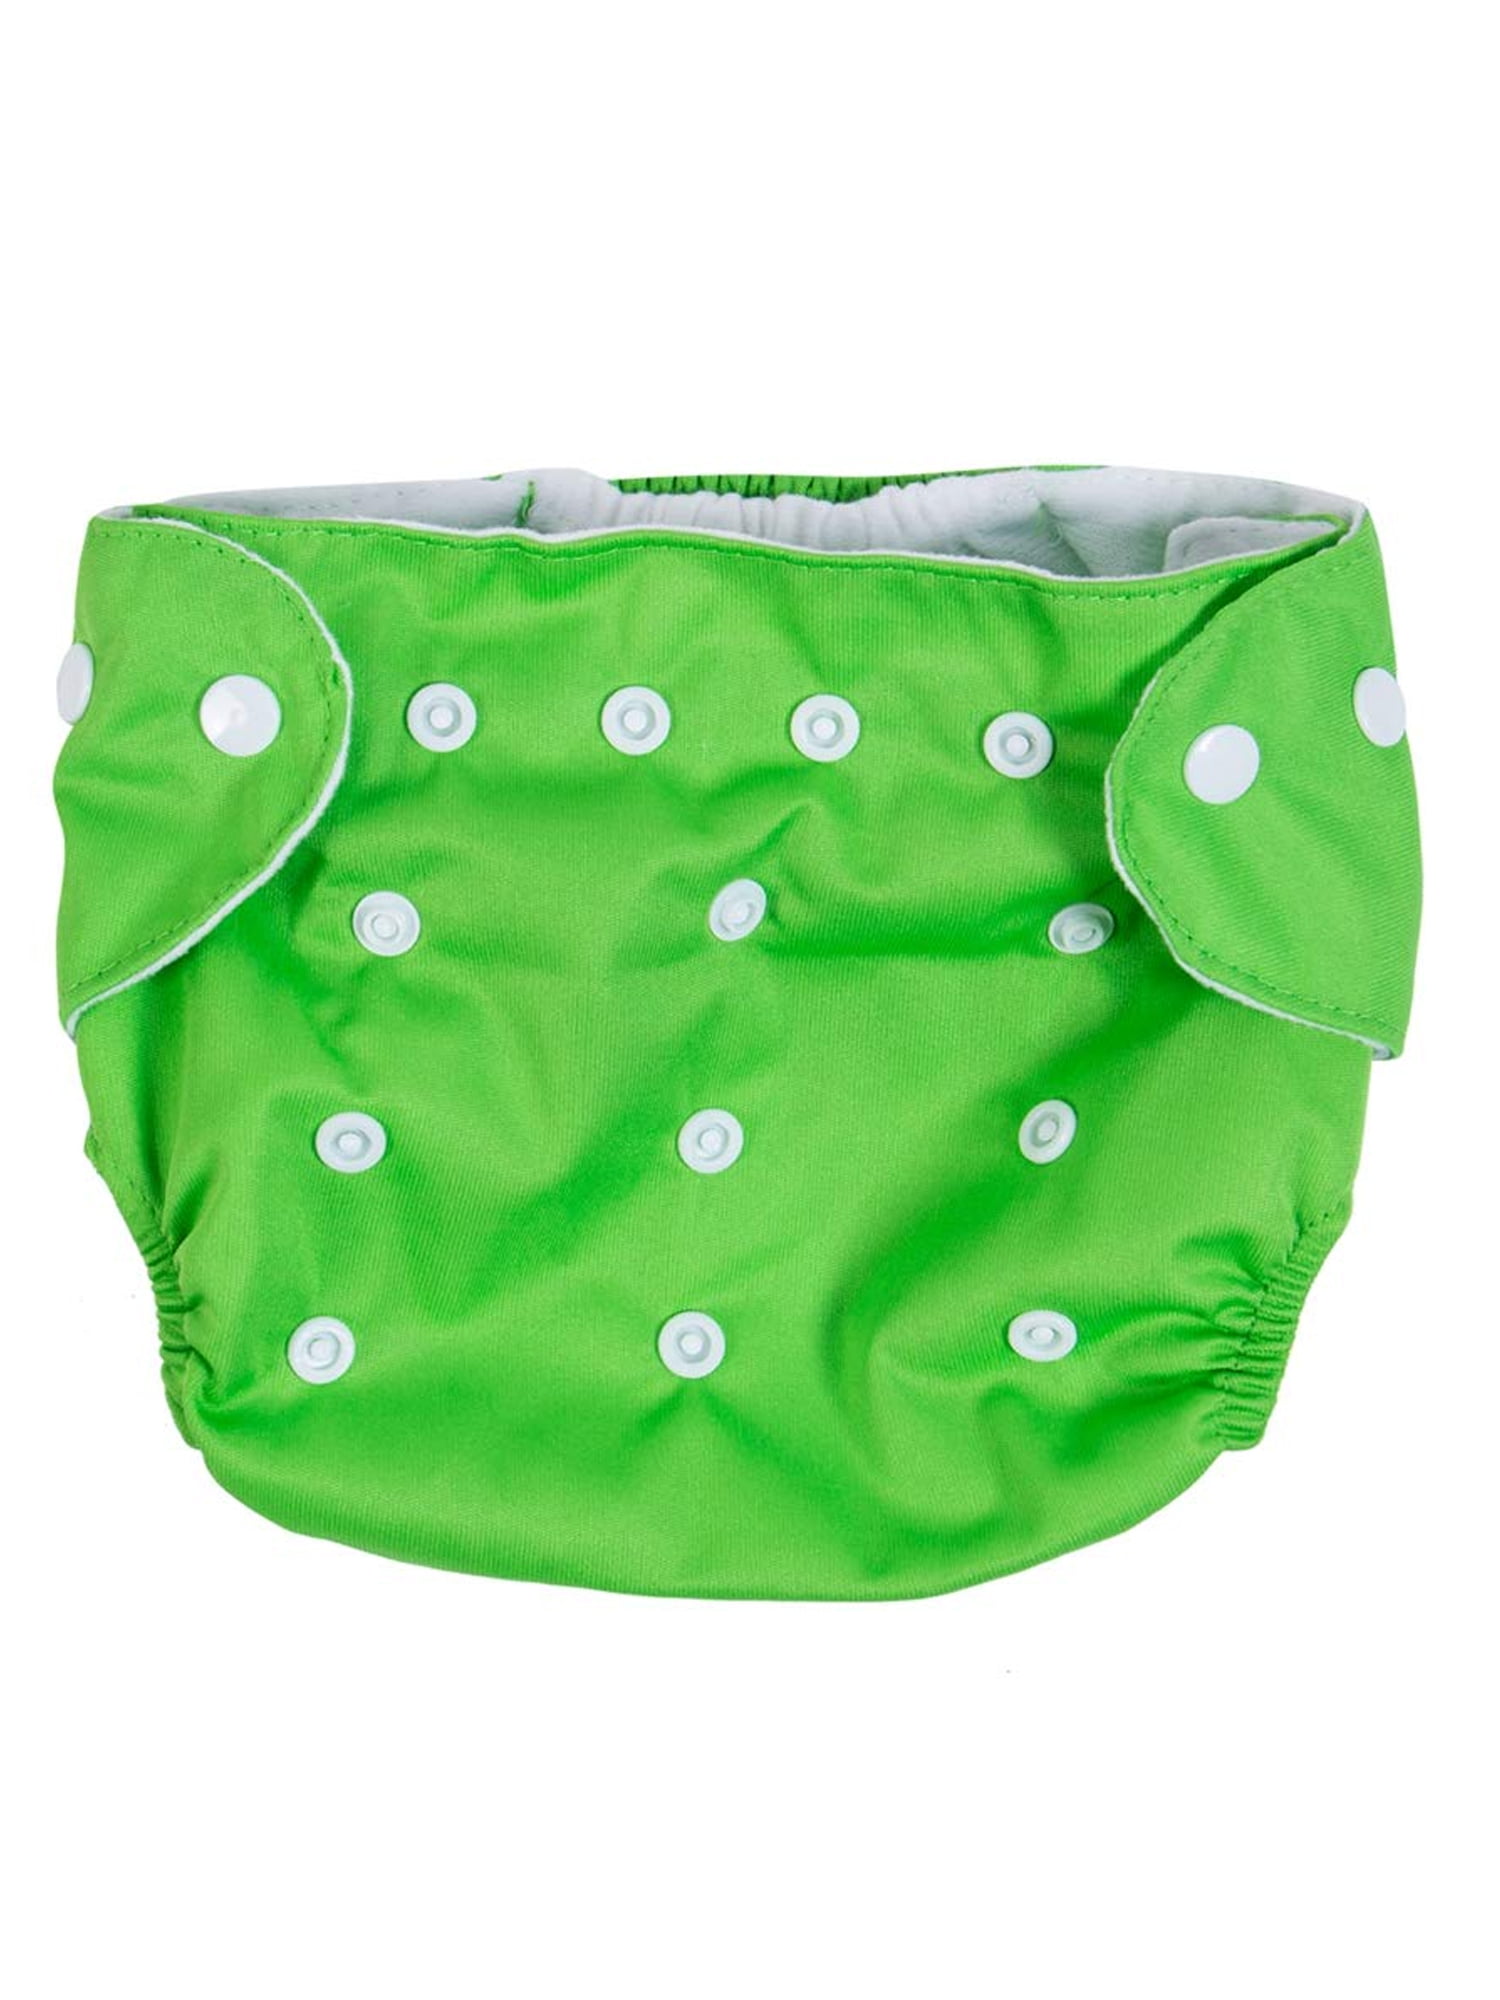 NEWBORN Cloth Diaper Cover Baby Nappy Reusable Double Gusset 8lbs-10lbs Rocket 